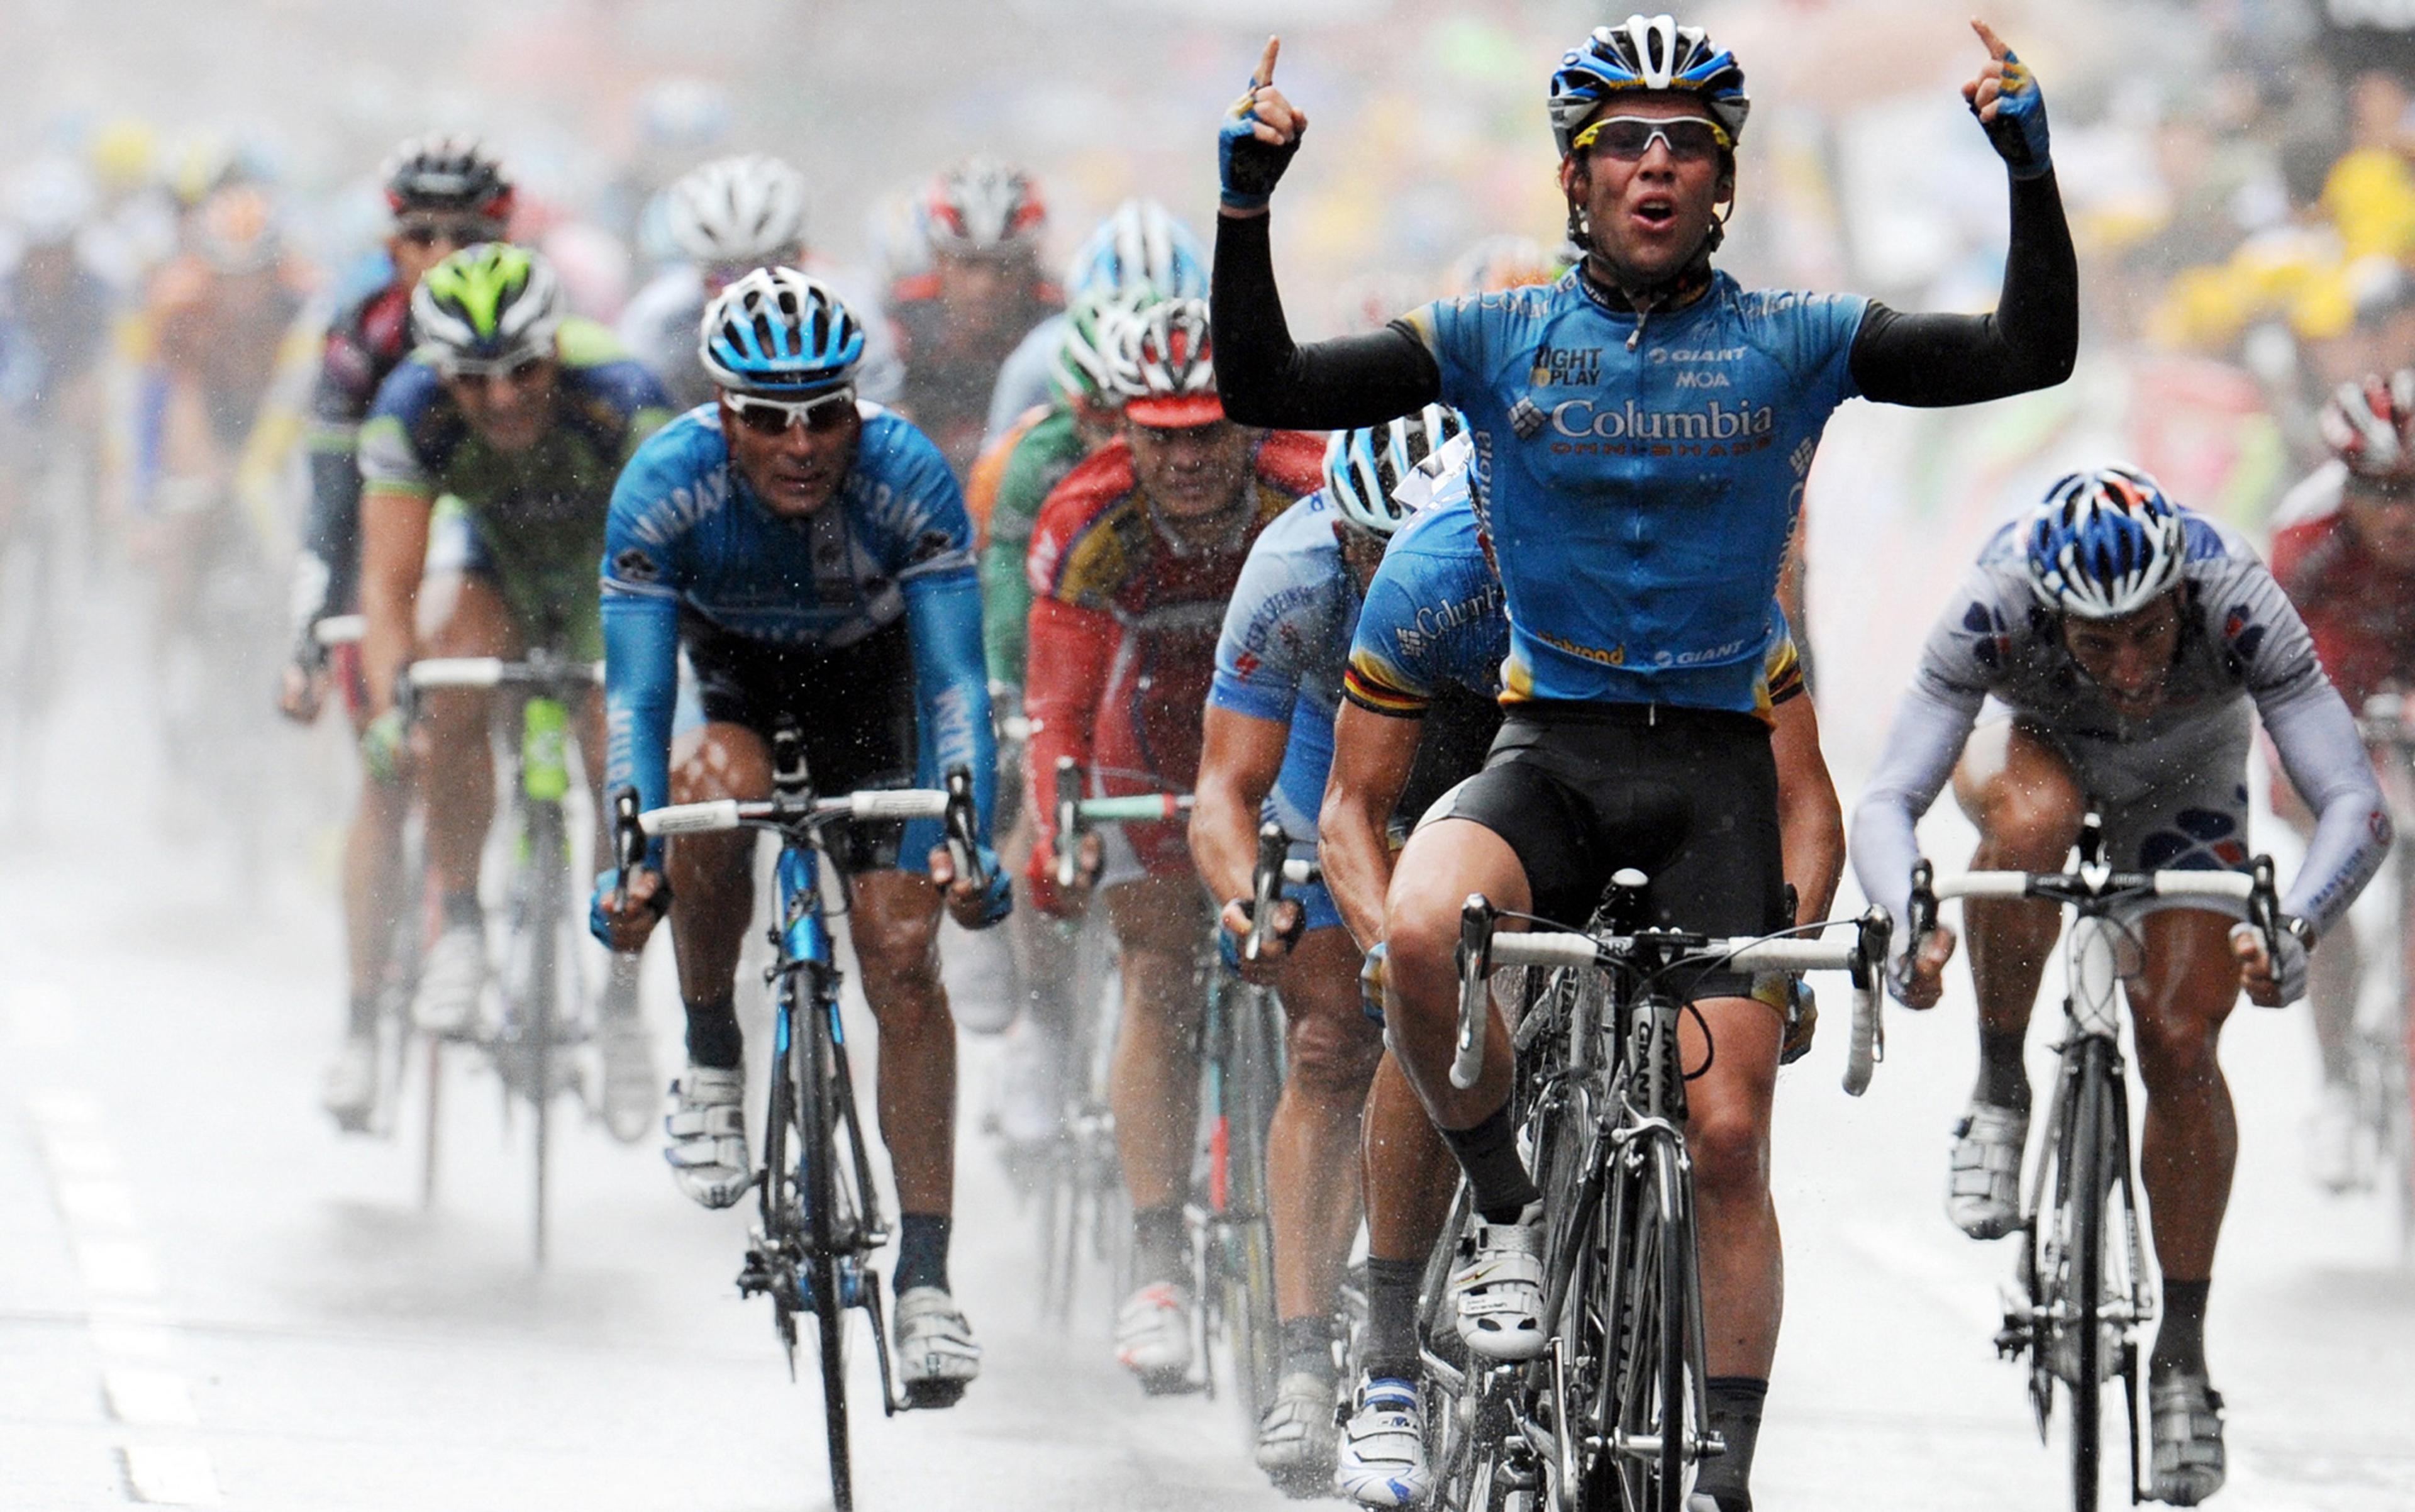 Cyclists in a professional race riding in rainy conditions. The leading cyclist in a blue jersey raises his arms in victory, with other cyclists closely following behind on the wet road. Everyone is wearing helmets and sunglasses for protection.